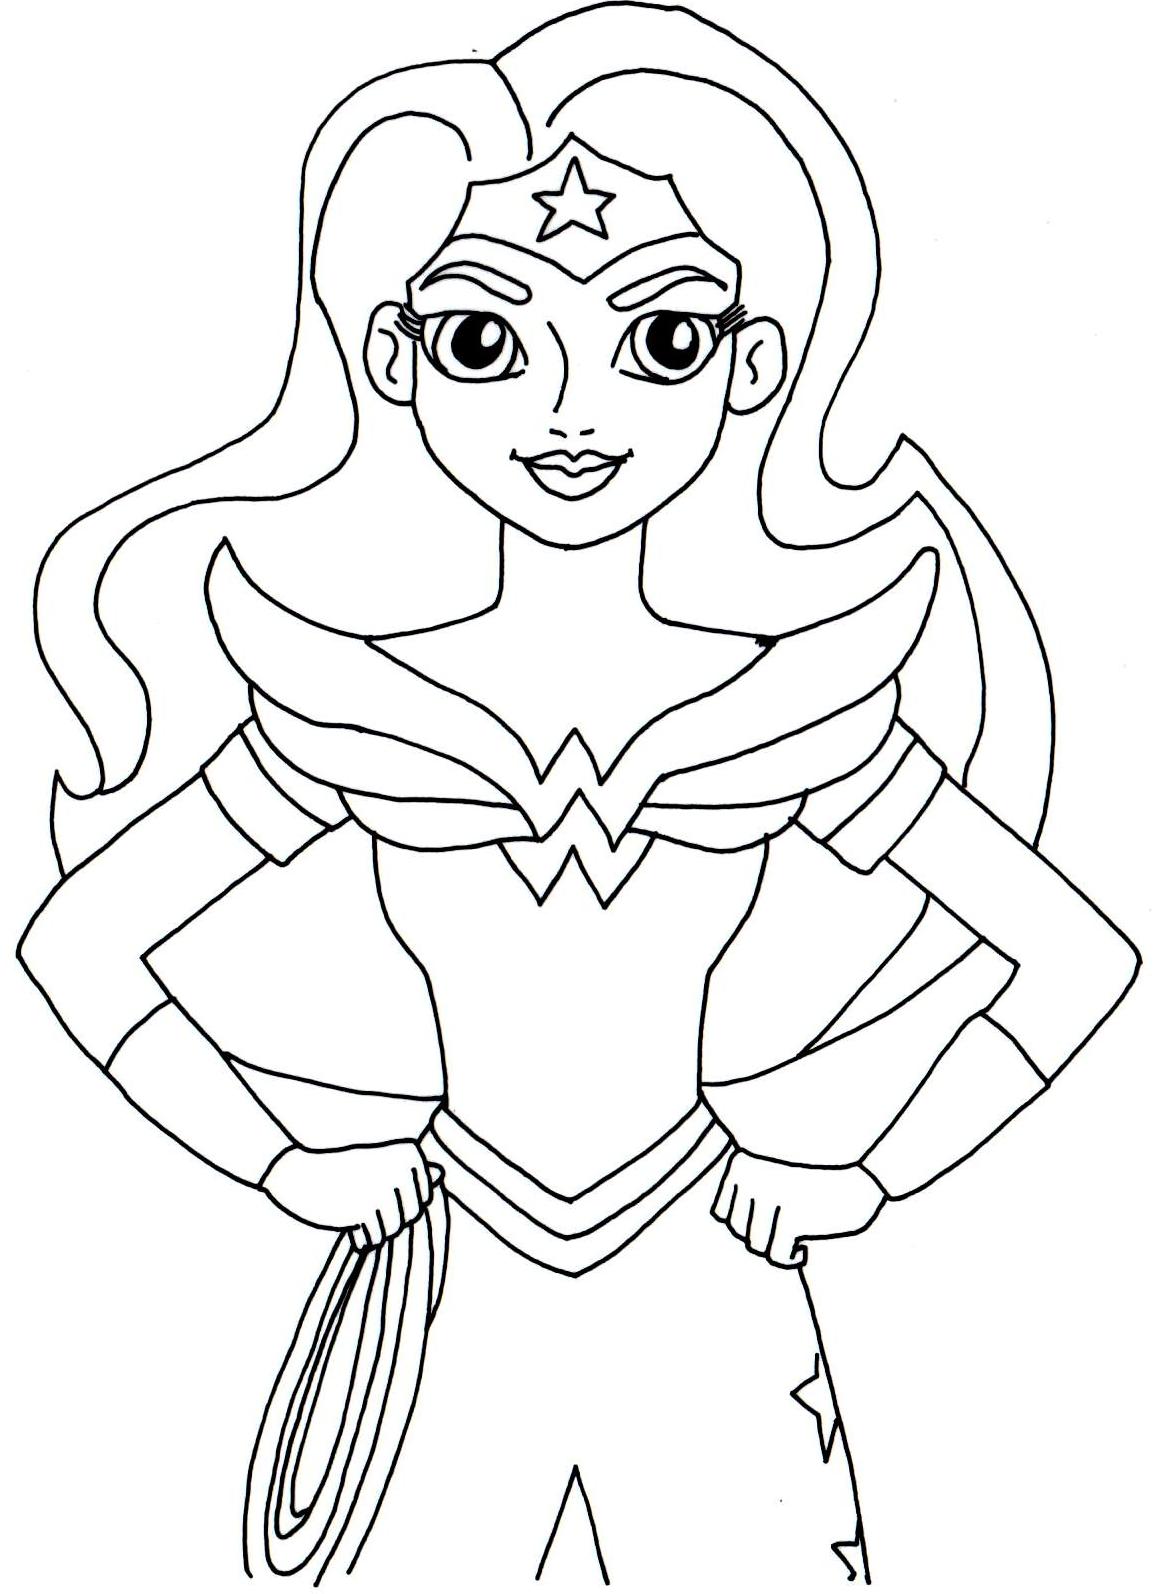 Download Wonder Woman Coloring Pages - Best Coloring Pages For Kids